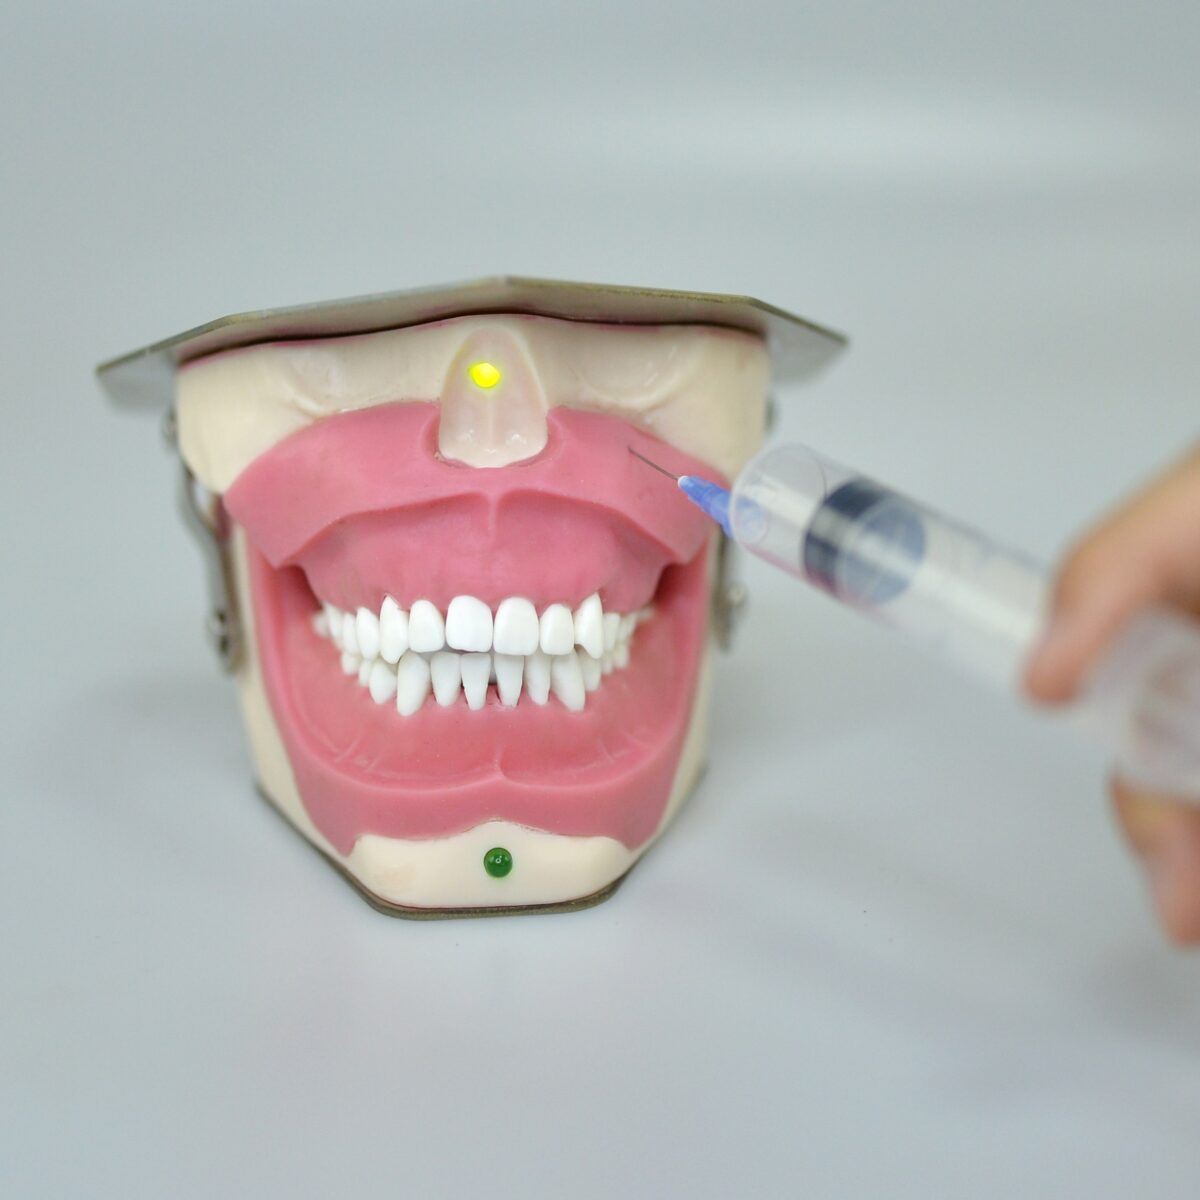 anesthesia tooth extraction models